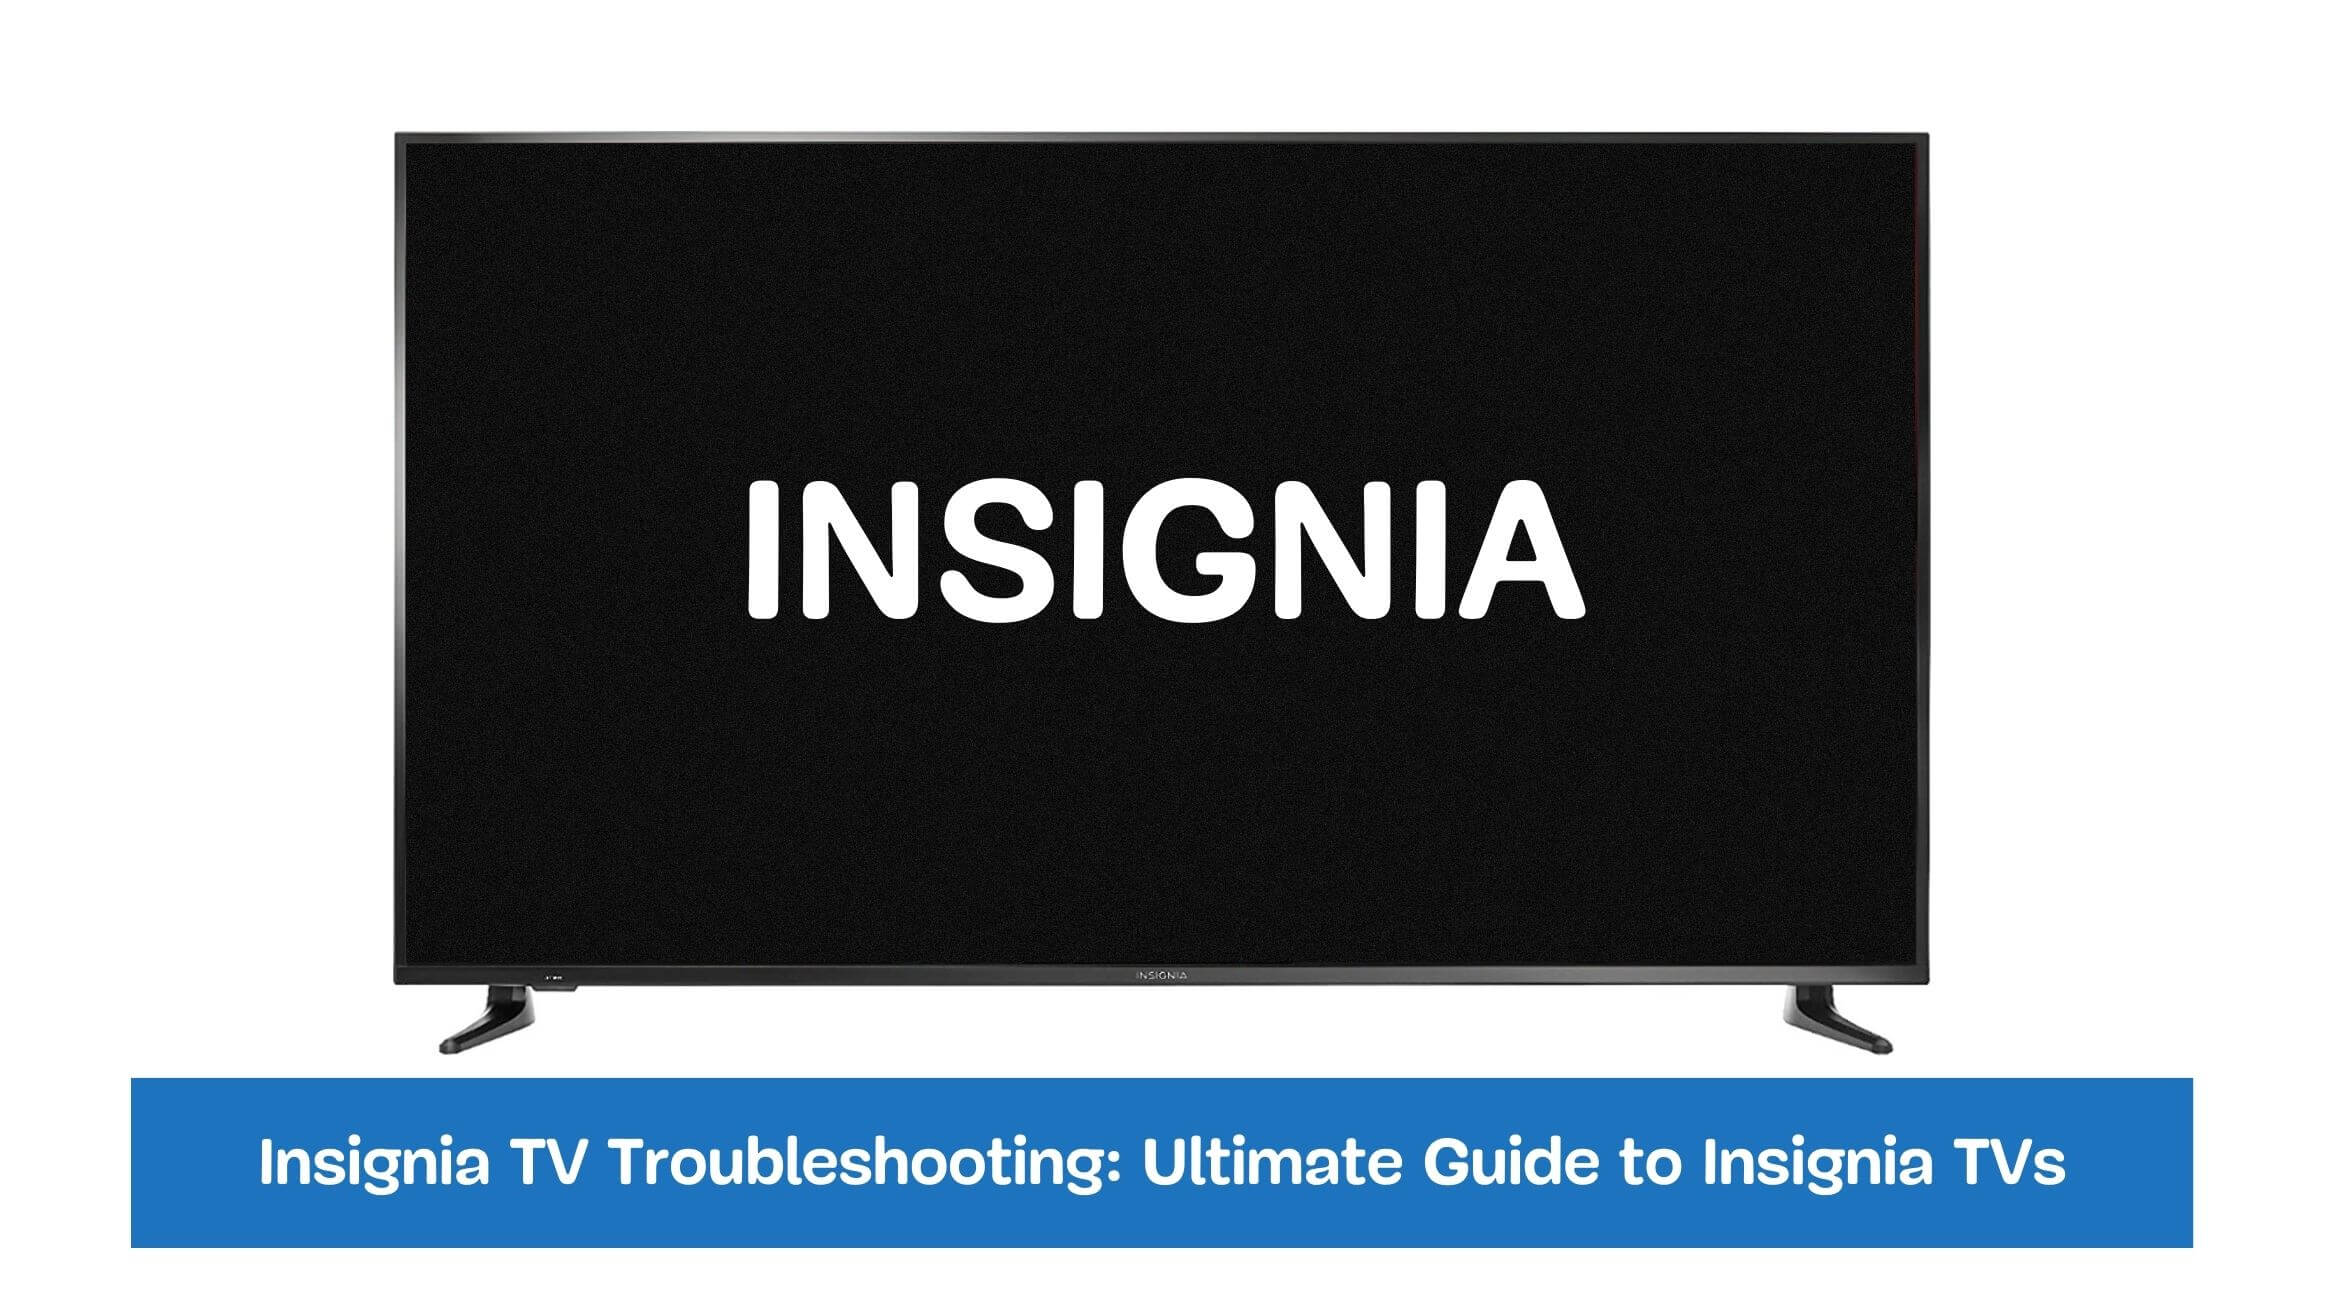 Insignia TV Troubleshooting: Ultimate Guide to Insignia TVs